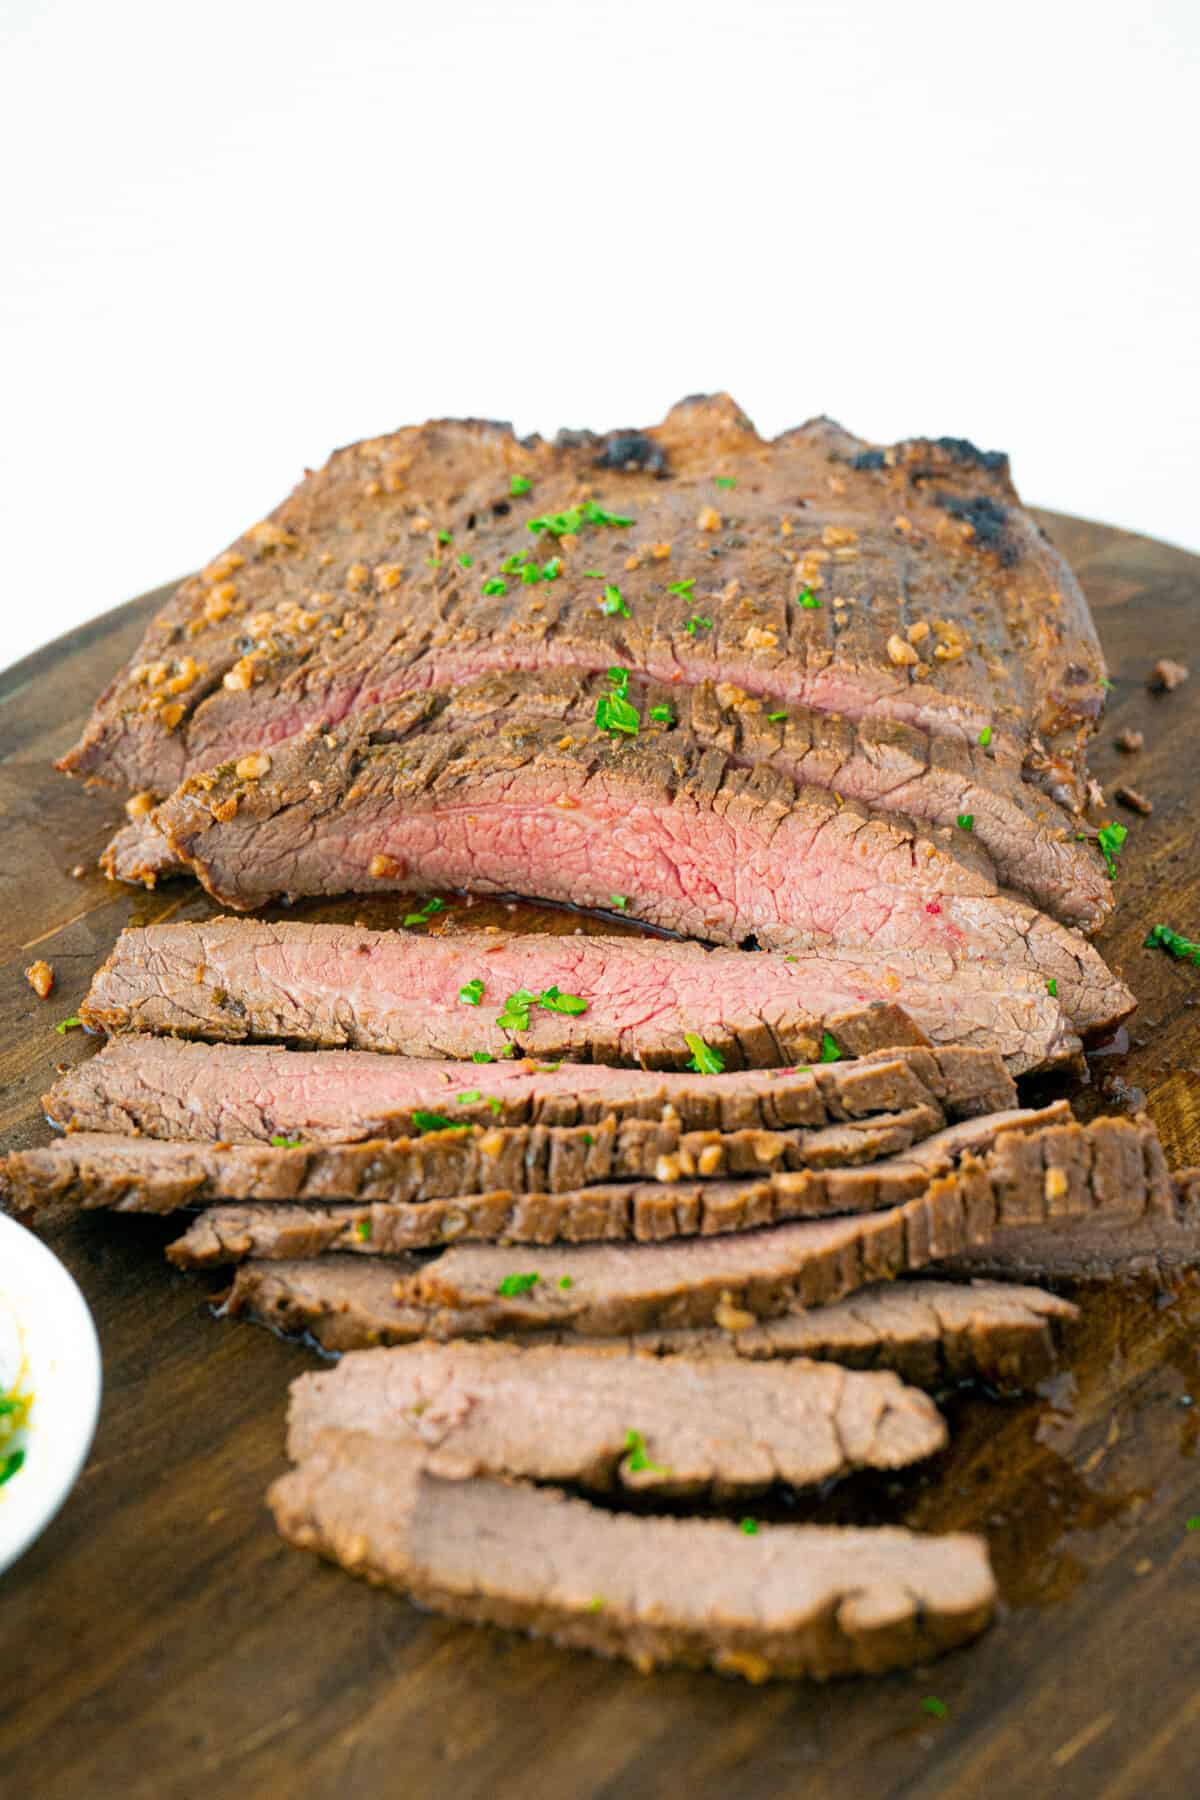 London broil sliced on a wooden board